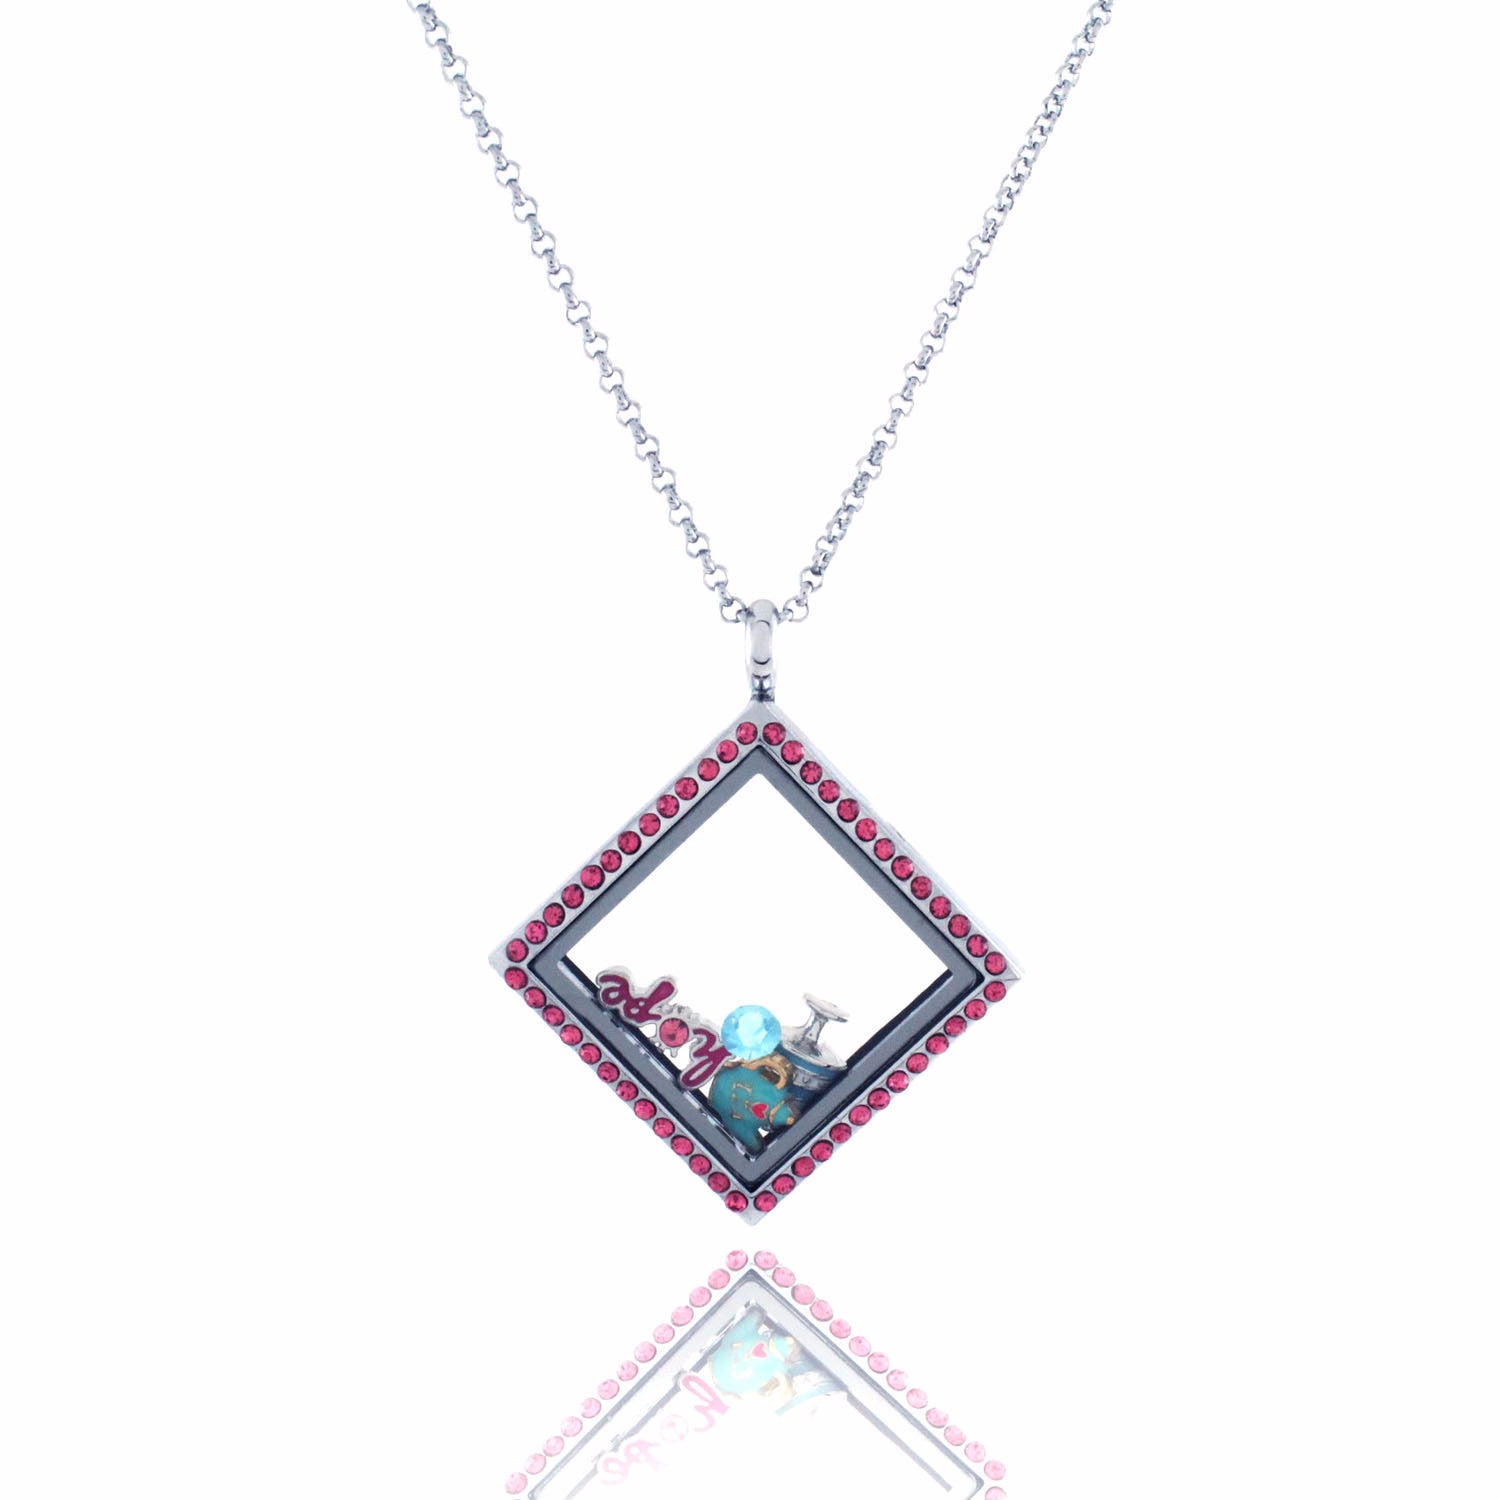 Floating Locket Necklace with Choice of 6 Charms and Matching Chain (Pink Rhinestone Diamond)